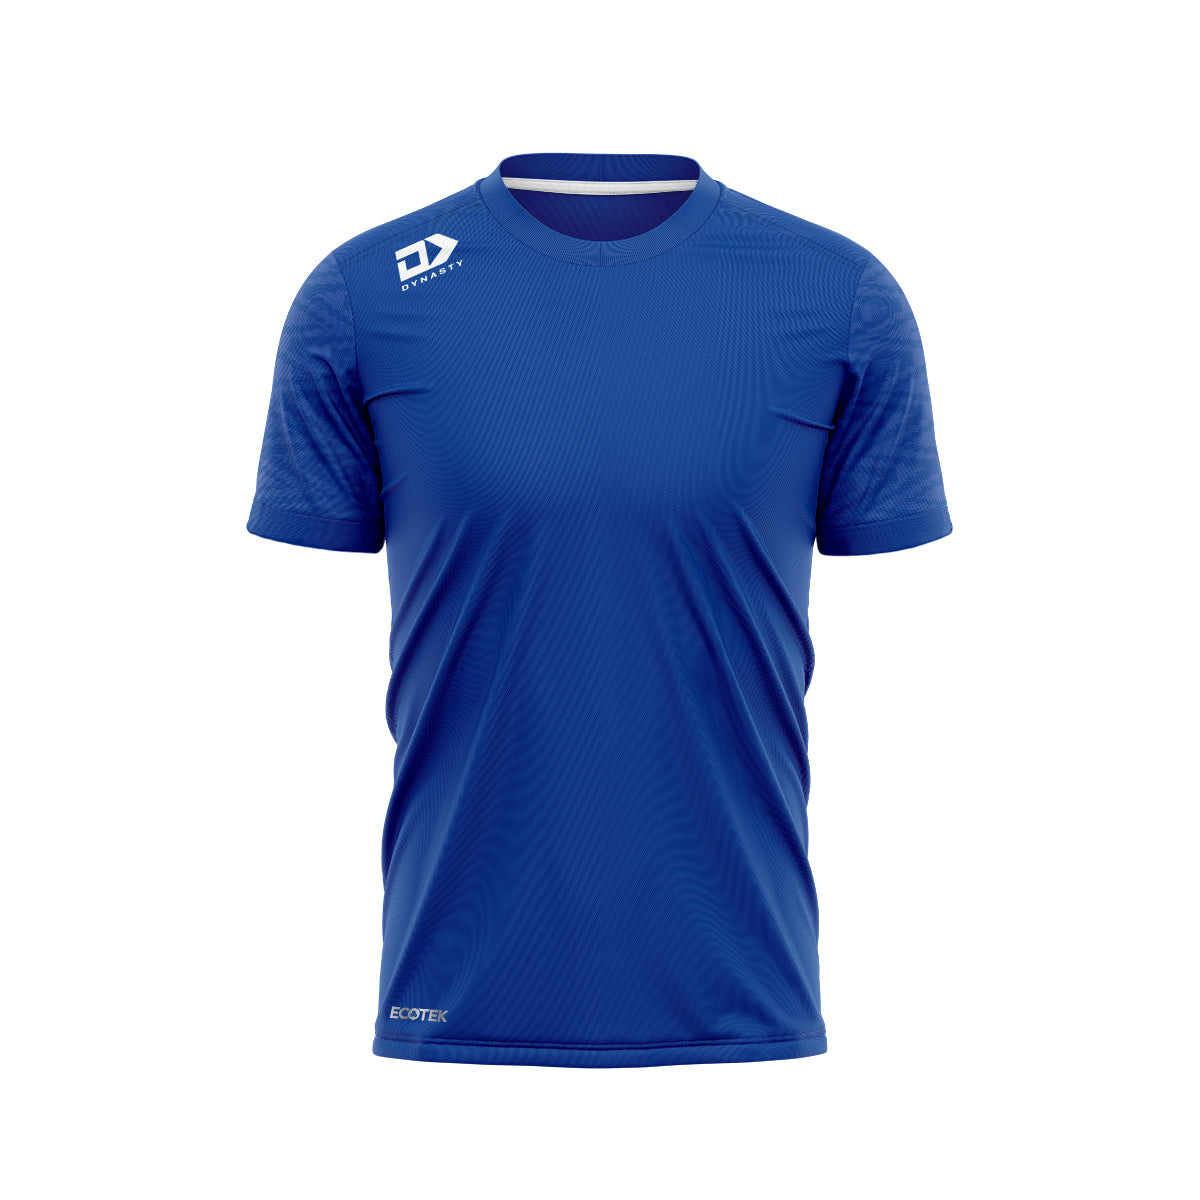 DS Adult Royal Sport Tee